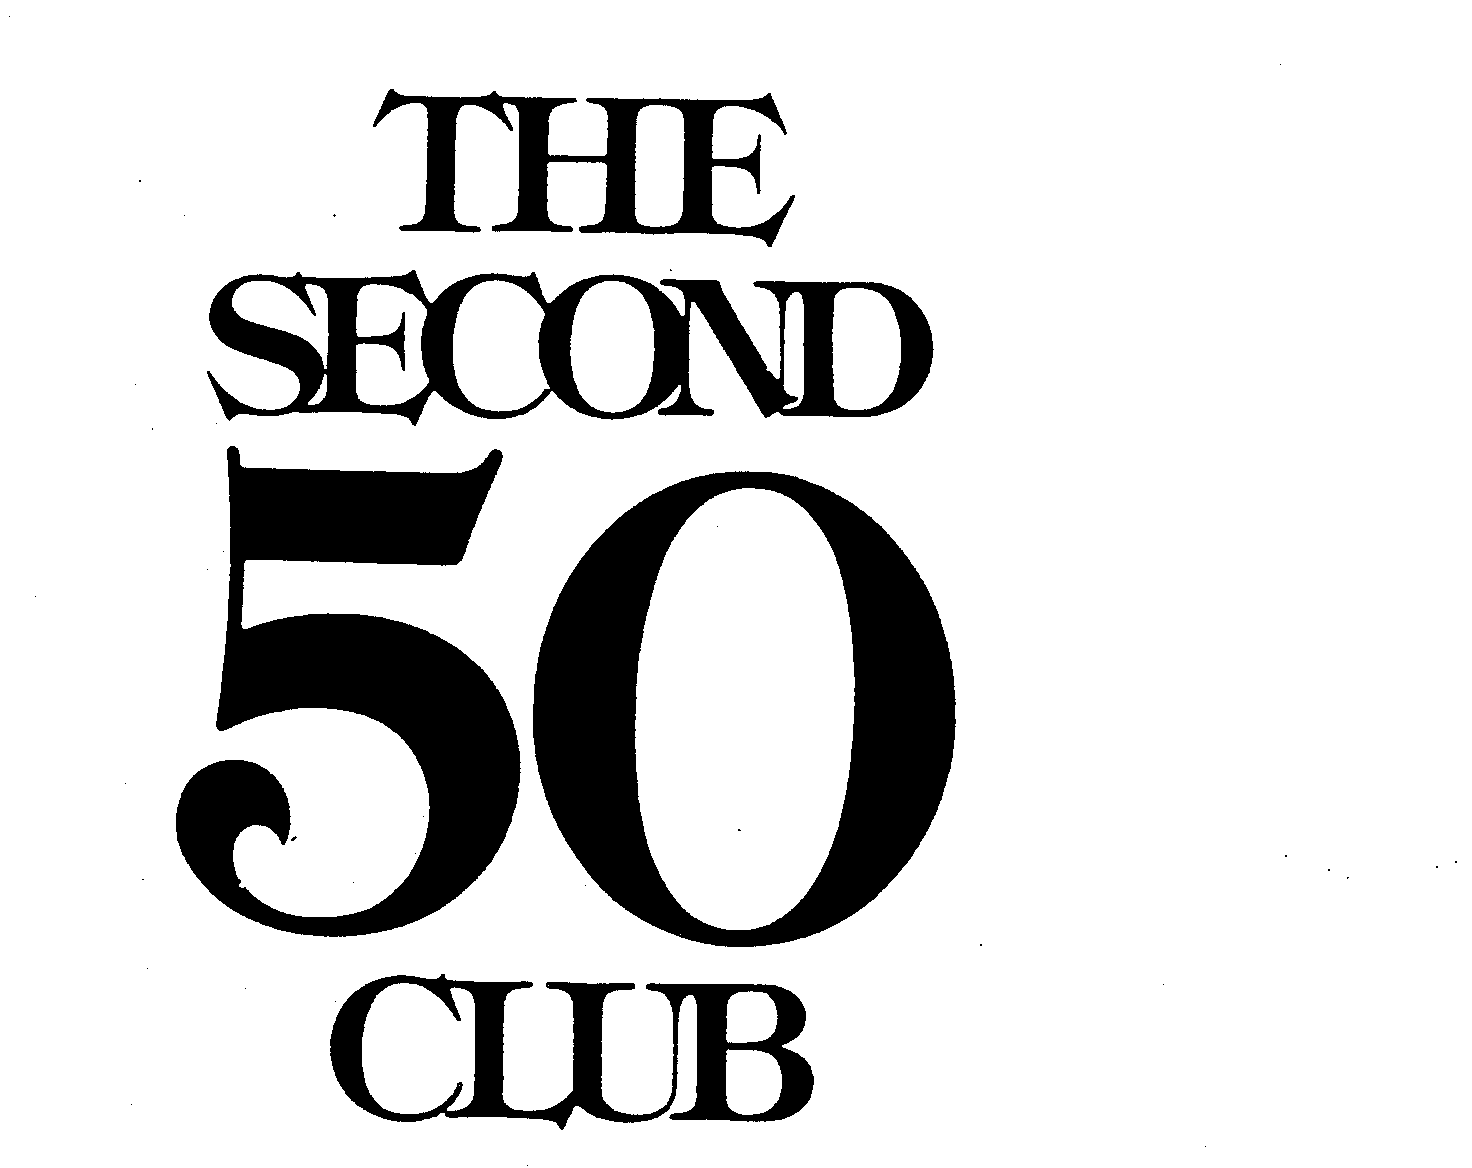  THE SECOND 50 CLUB